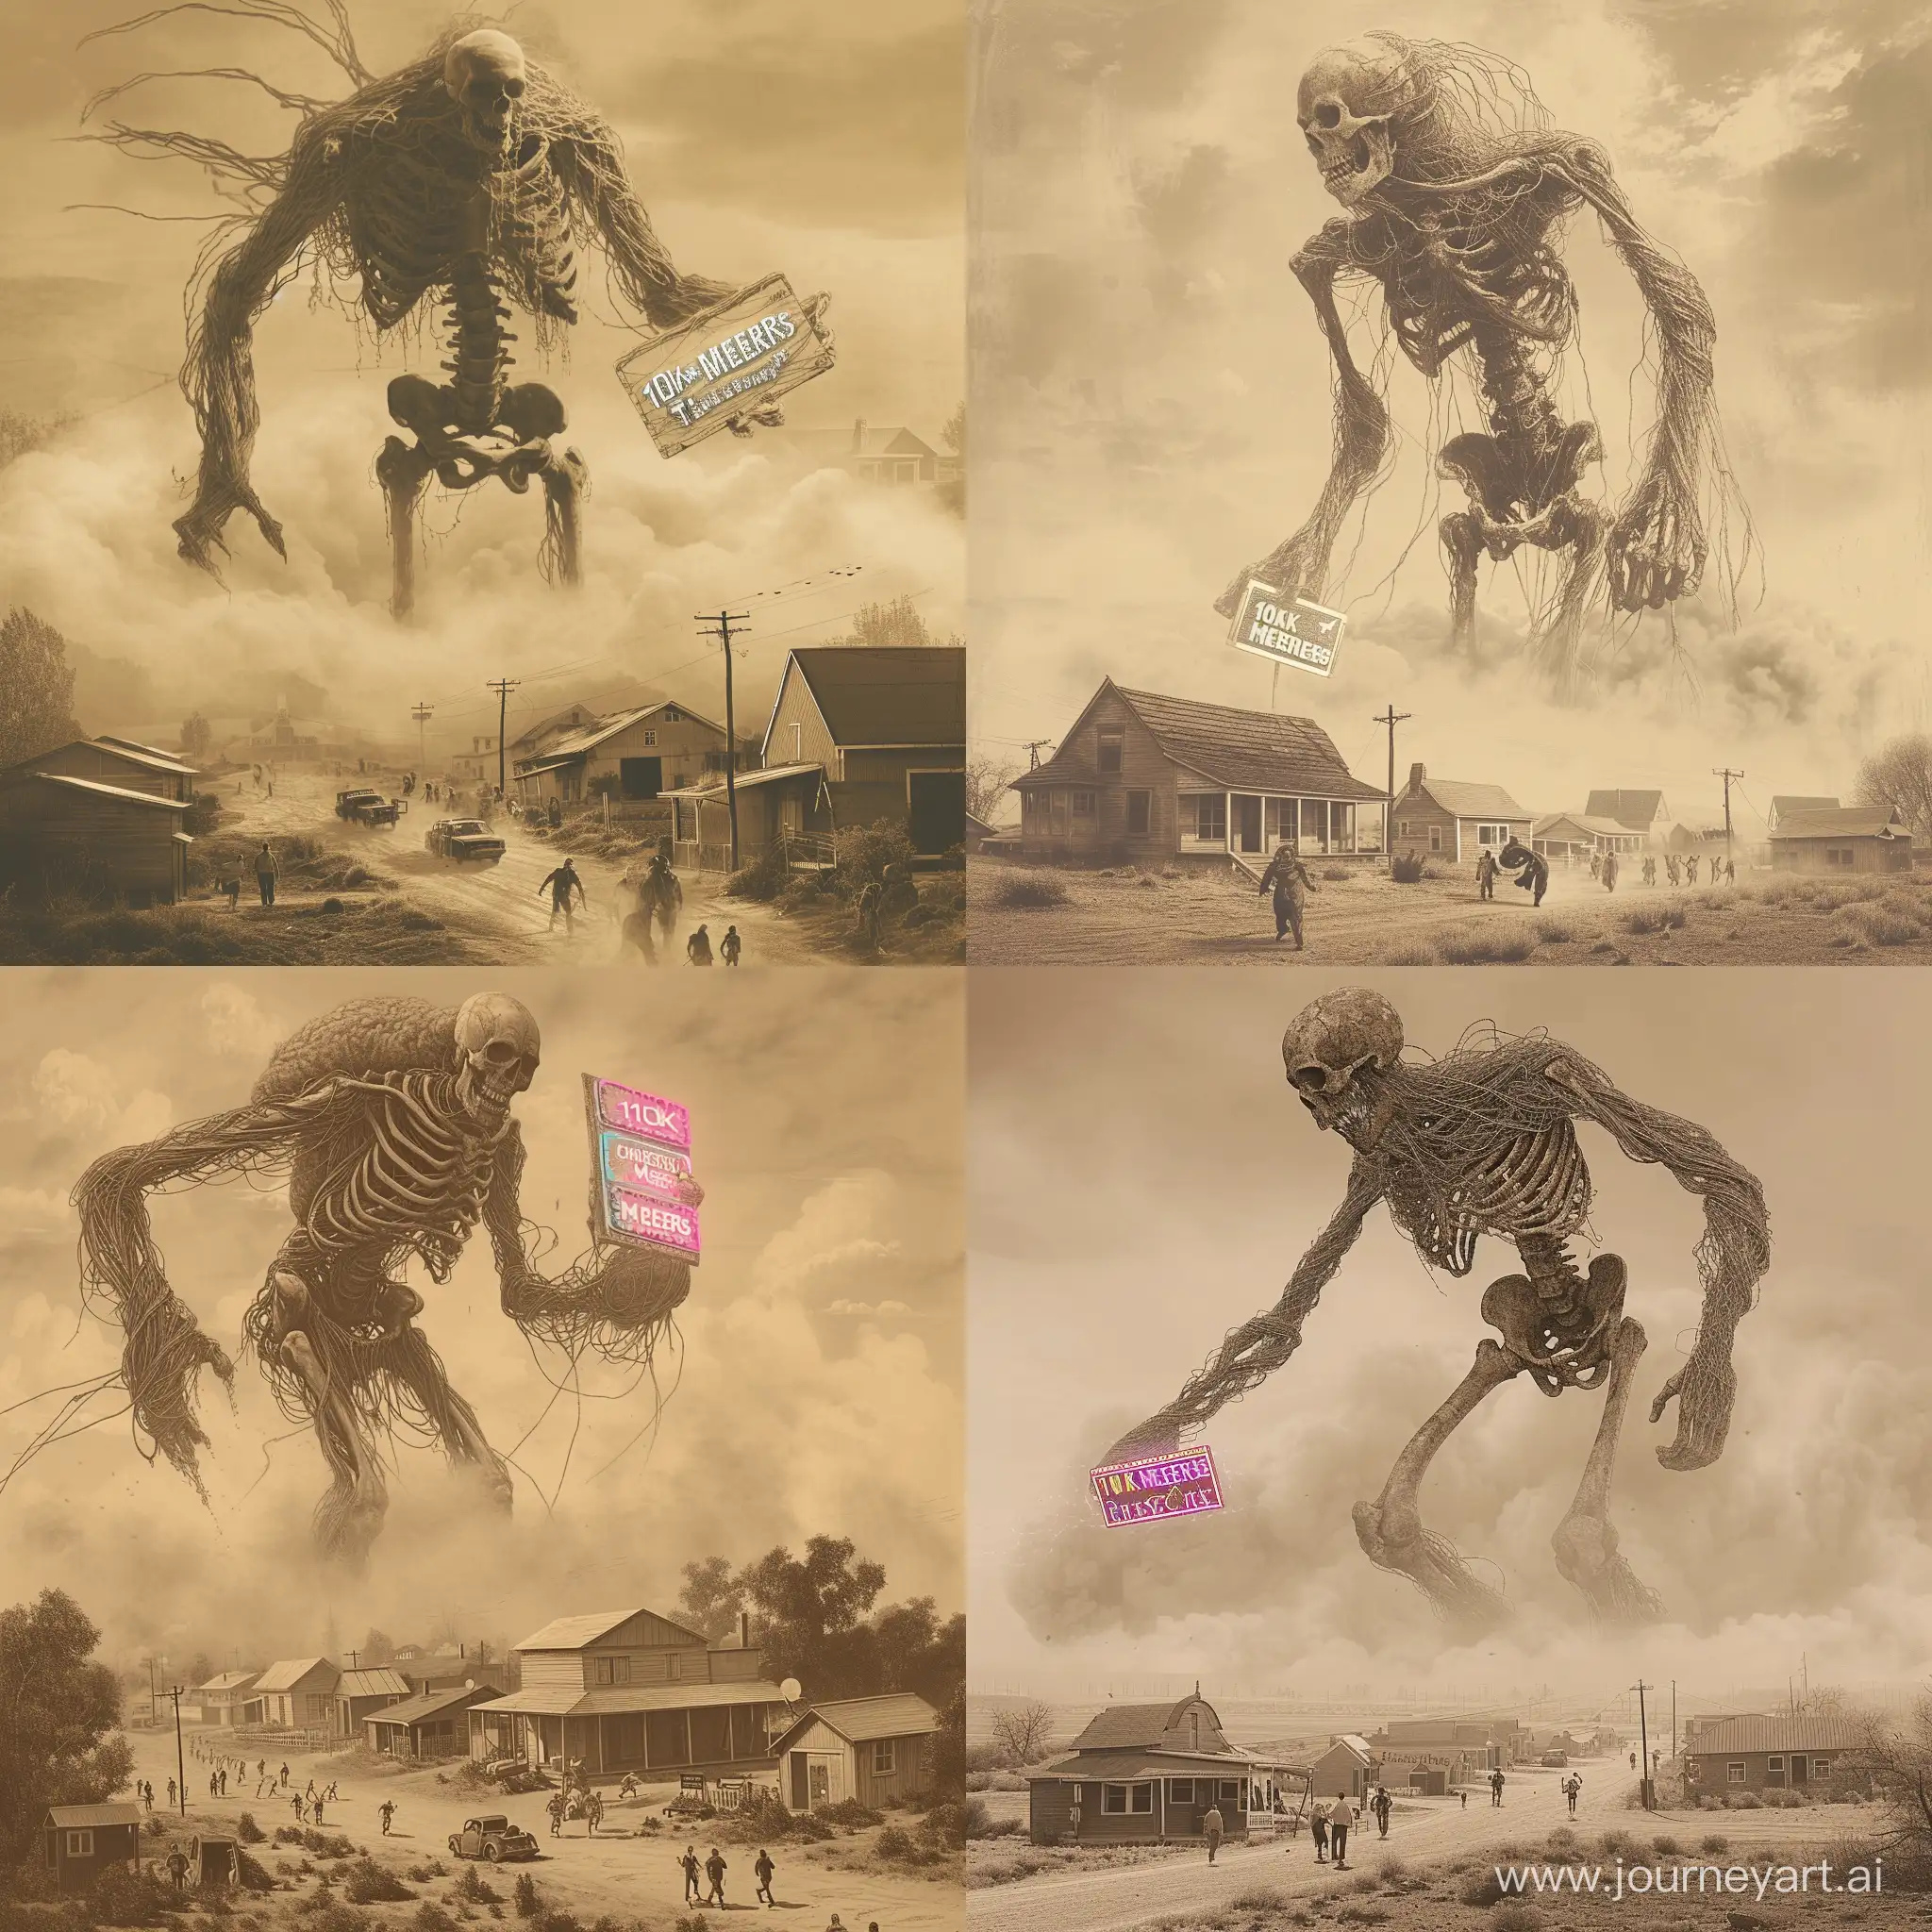 an artistic rendition, likely intended to be humorous or part of a meme. It depicts a giant, skeletal, humanoid figure rising from a dust cloud over a small, rural town. This figure appears to be made of various twisted and intertwined strands that gives it a decrepit and ominous appearance. Strangely enough, the figure is holding what looks like a billboard with the text "10k MEMERS" blazing in bright, neon-like colors. Below the immense figure, the town seems to be in a state of panic or confusion, with people fleeing on foot and via a vehicle. The town itself contains small, simple buildings typical of a rural community, and the entire scene is enveloped in a sepia-toned atmosphere, which reinforces the impression of a dusty environment. The surreal, out-of-place element of the gigantic skeletal being contrasts sharply with the mundane setting of the town 